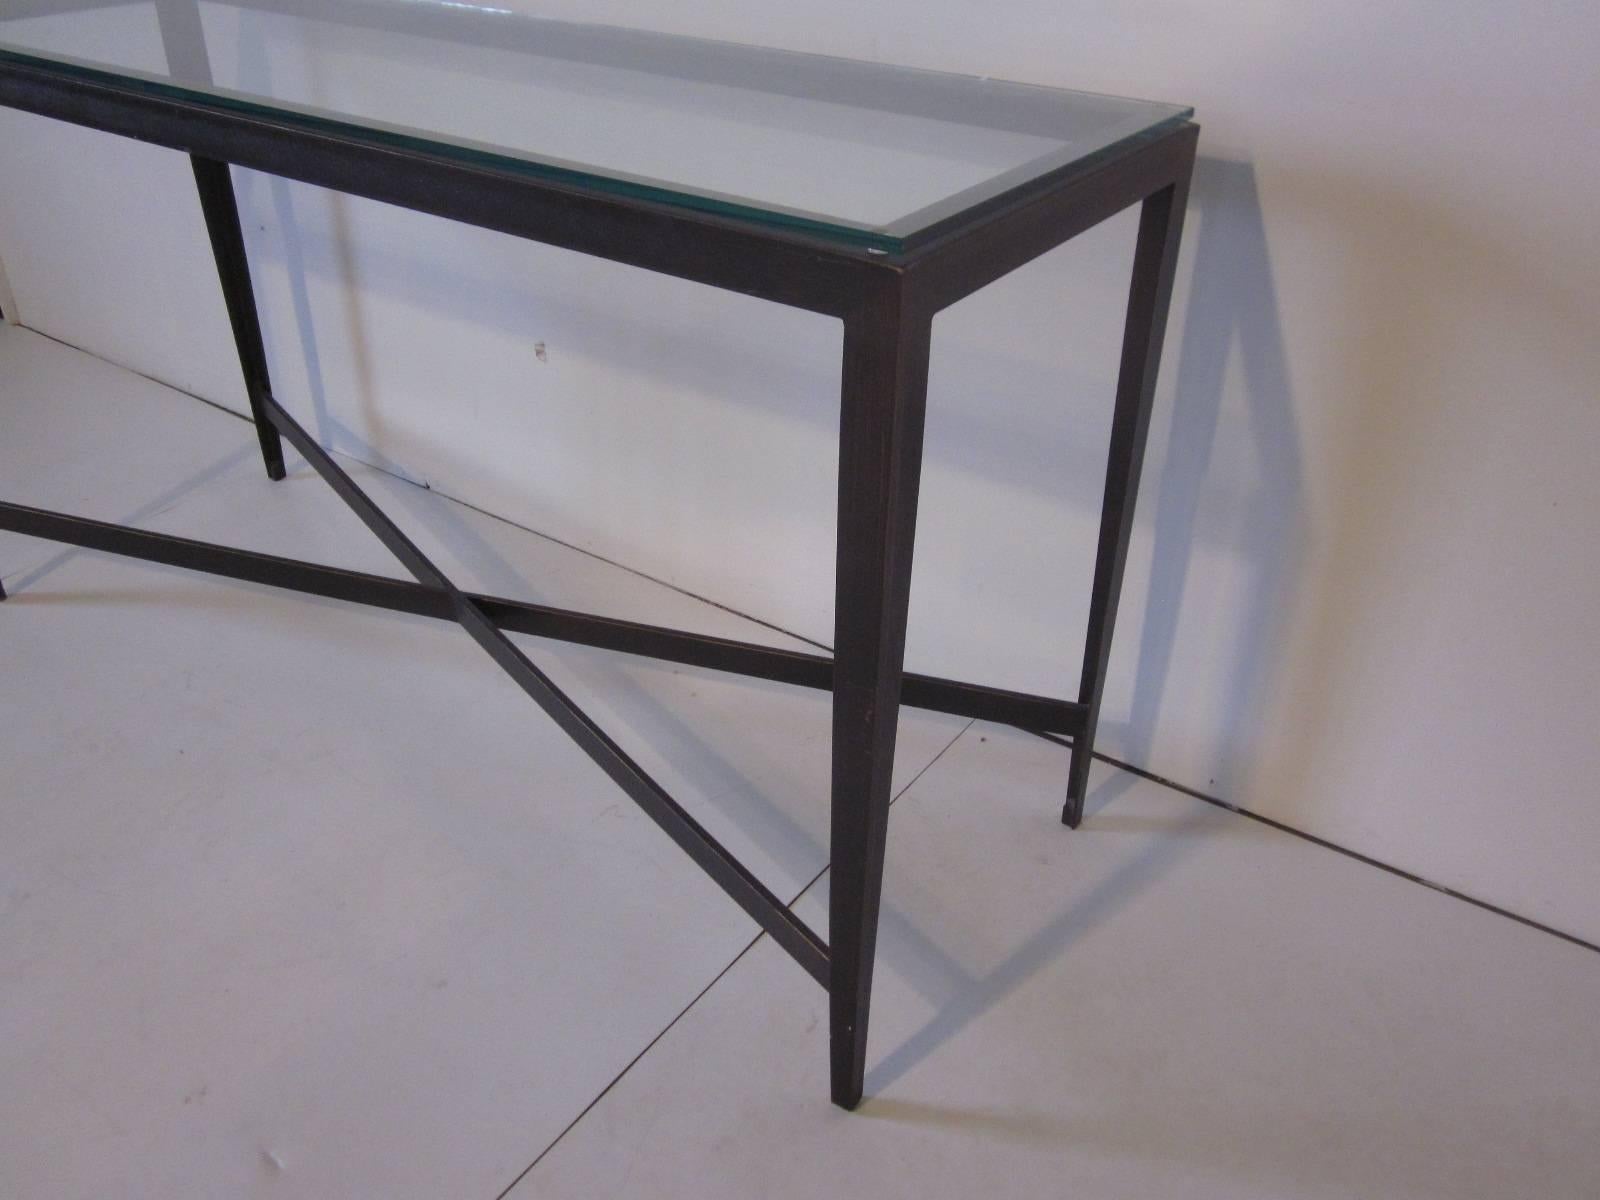 A plate glass topped steel console table in a faux bronze patina finish with crossed stretcher in an upscale Industrial Design look.